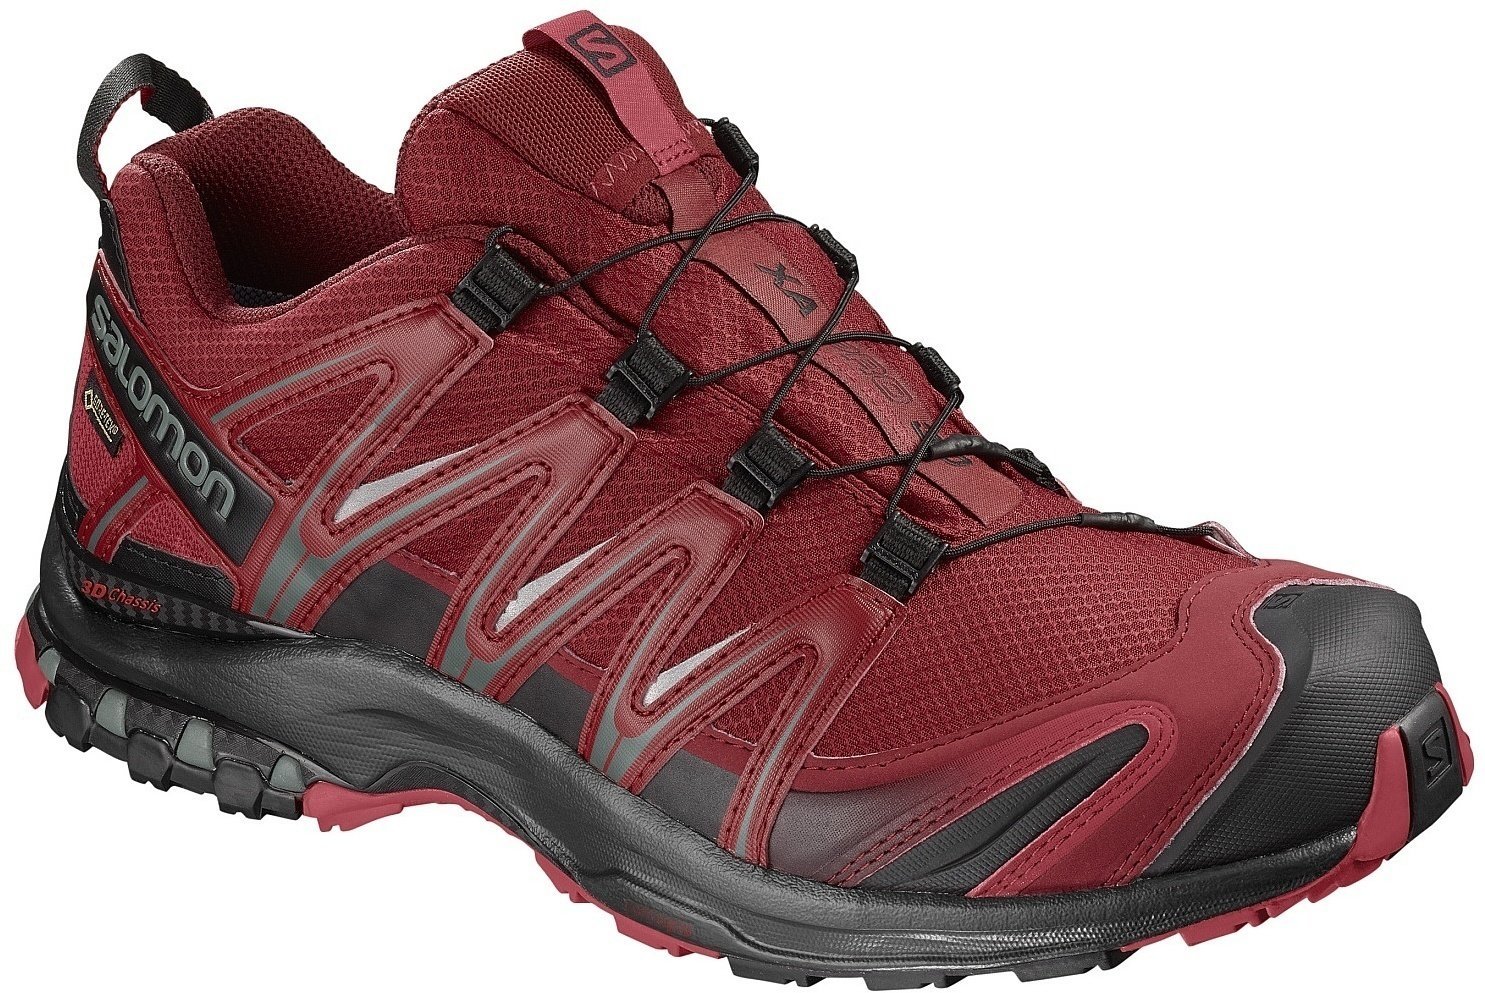 Chaussures outdoor hommes Salomon XA Pro 3D GTX Red Dahlia/Black/Barbados Cherry 43 1/3 Chaussures outdoor hommes